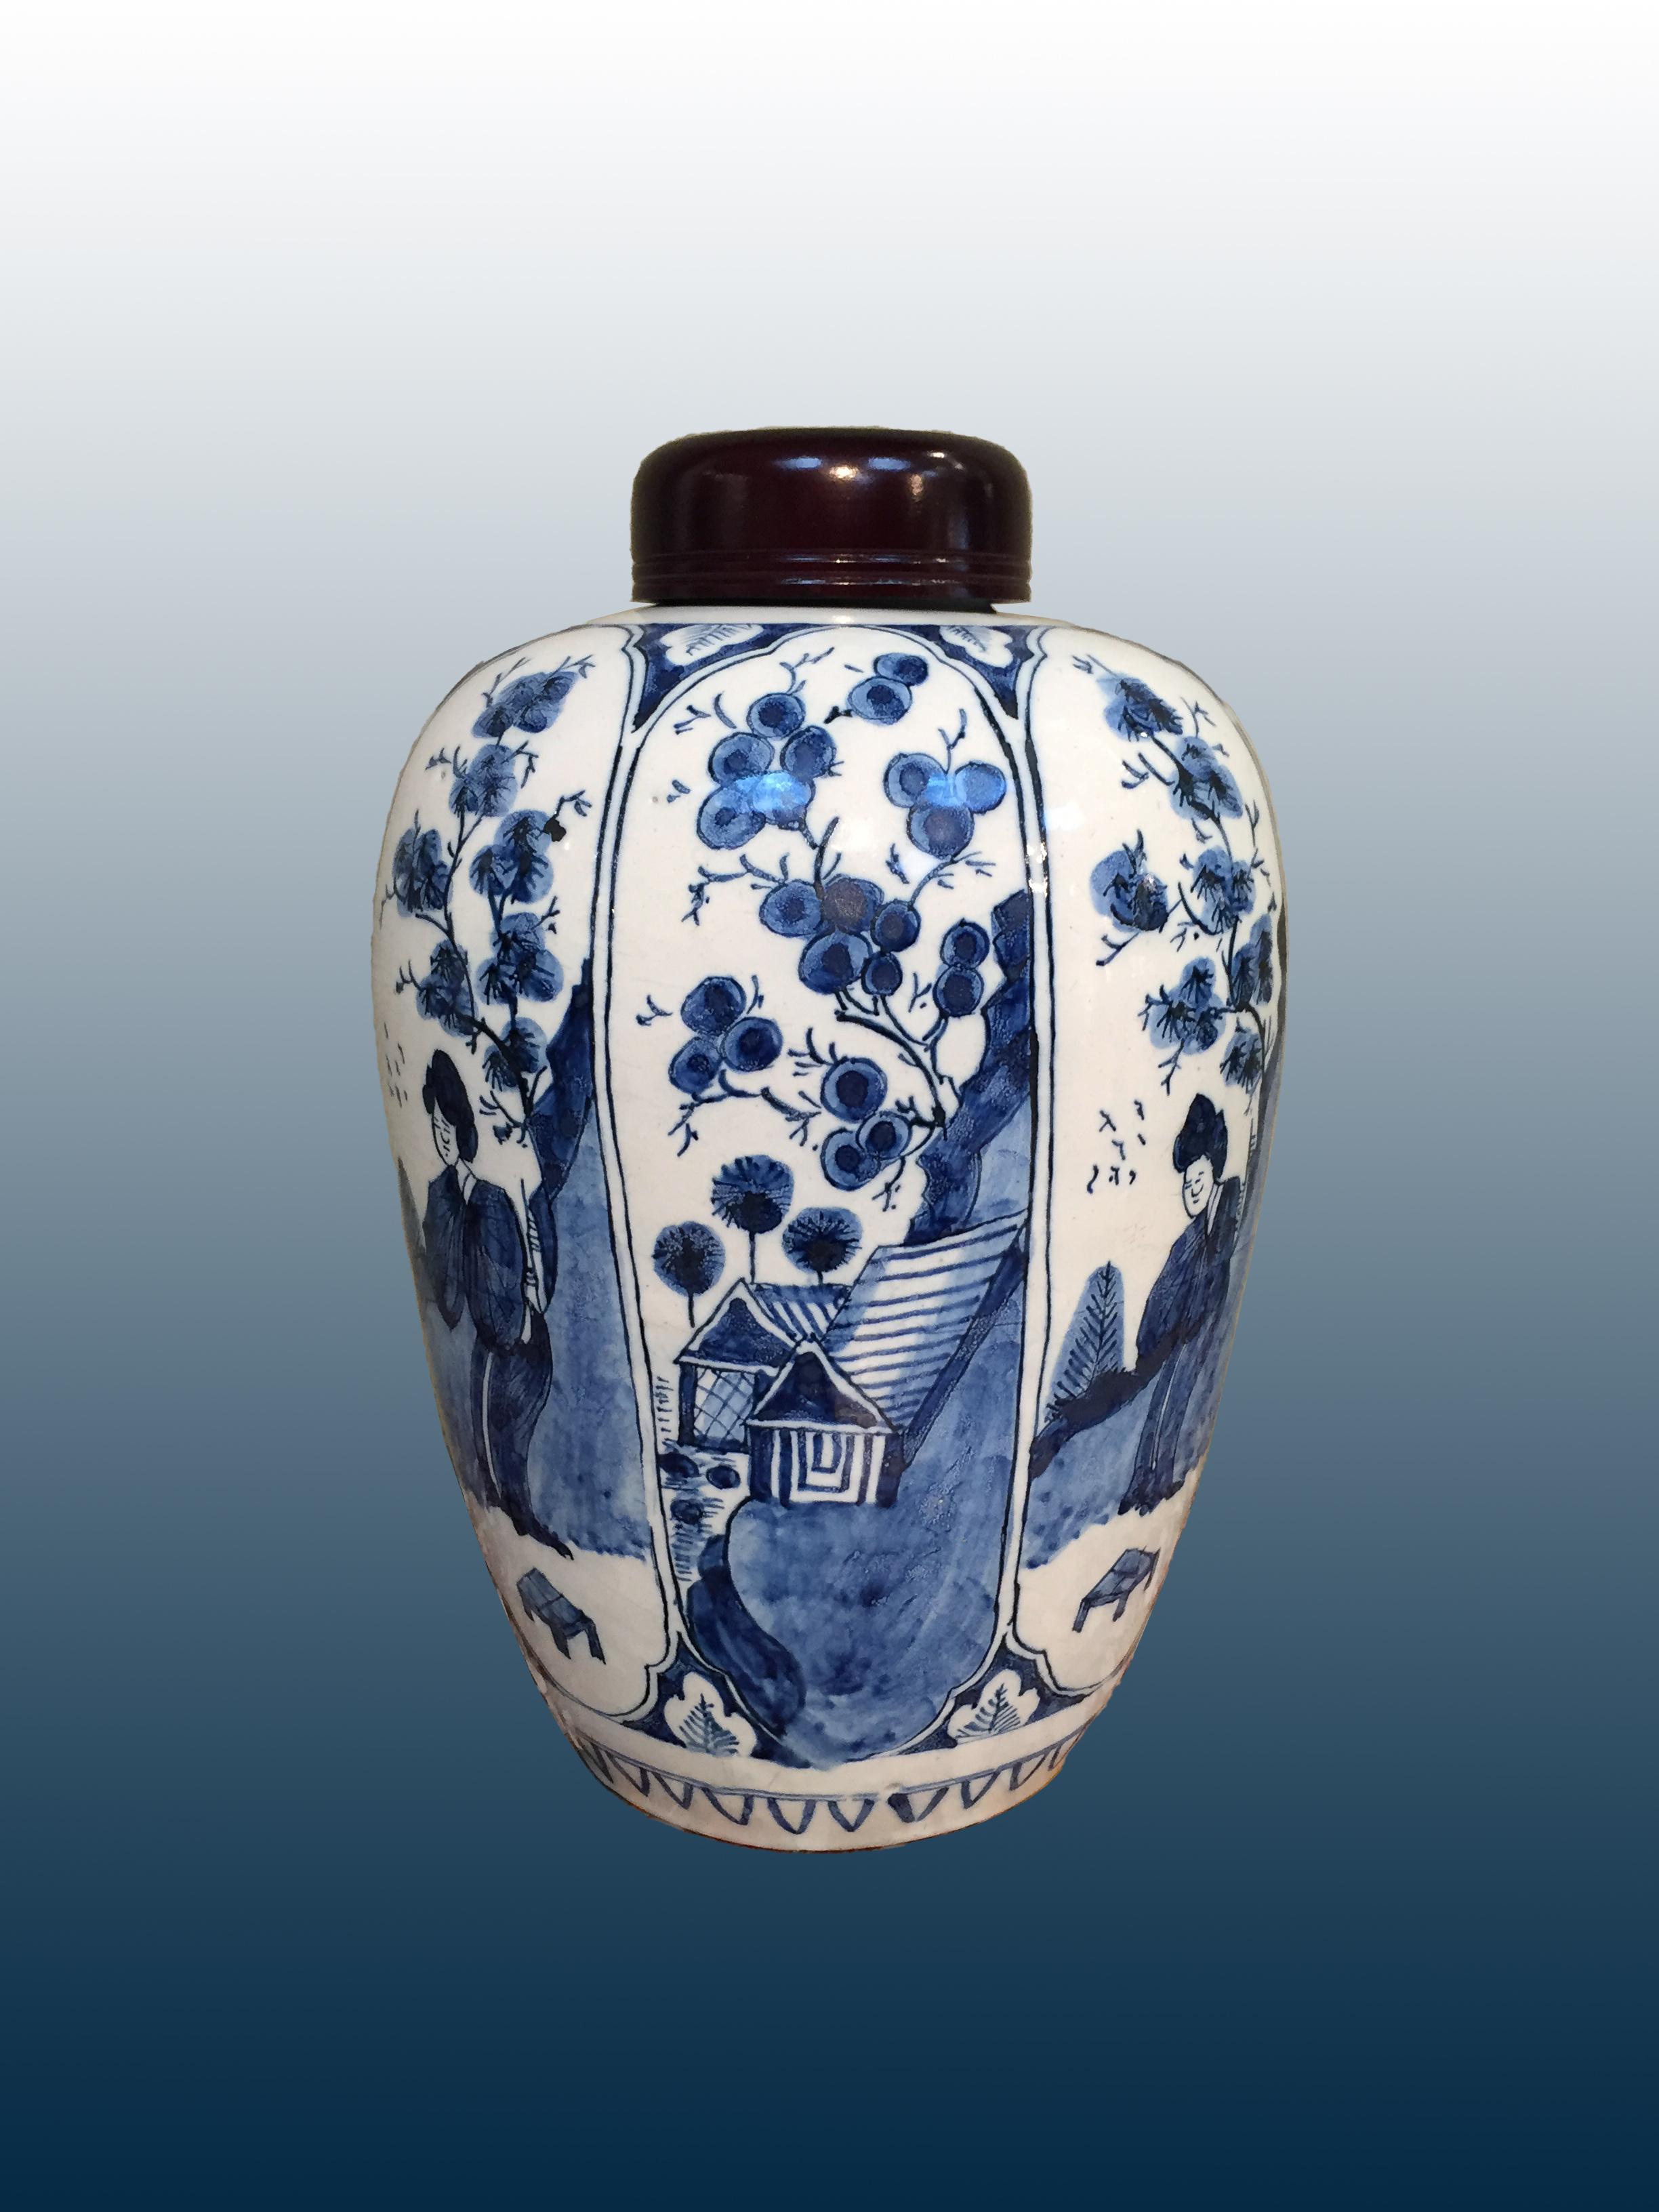 Fired Blue and White Dutch Delft Lidded Jar in Chinoiserie, Early 18th Century For Sale